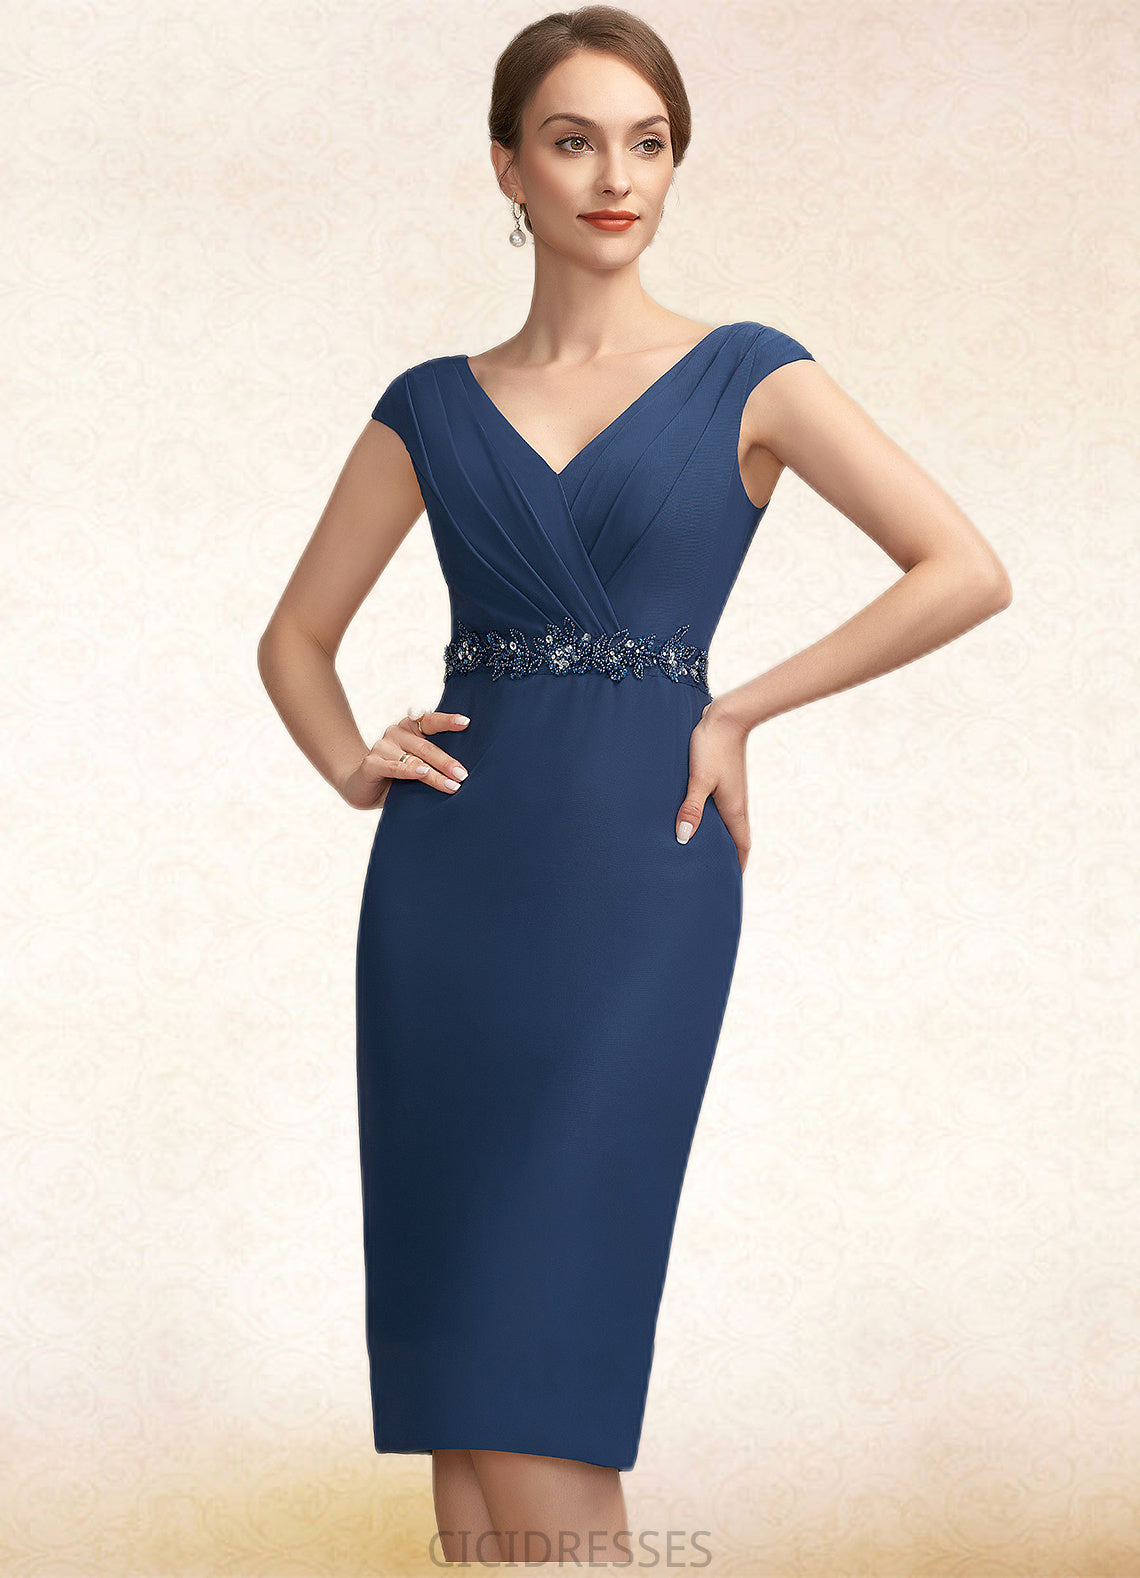 Lorna Sheath/Column V-neck Knee-Length Chiffon Mother of the Bride Dress With Ruffle Beading Sequins CIC8126P0014847